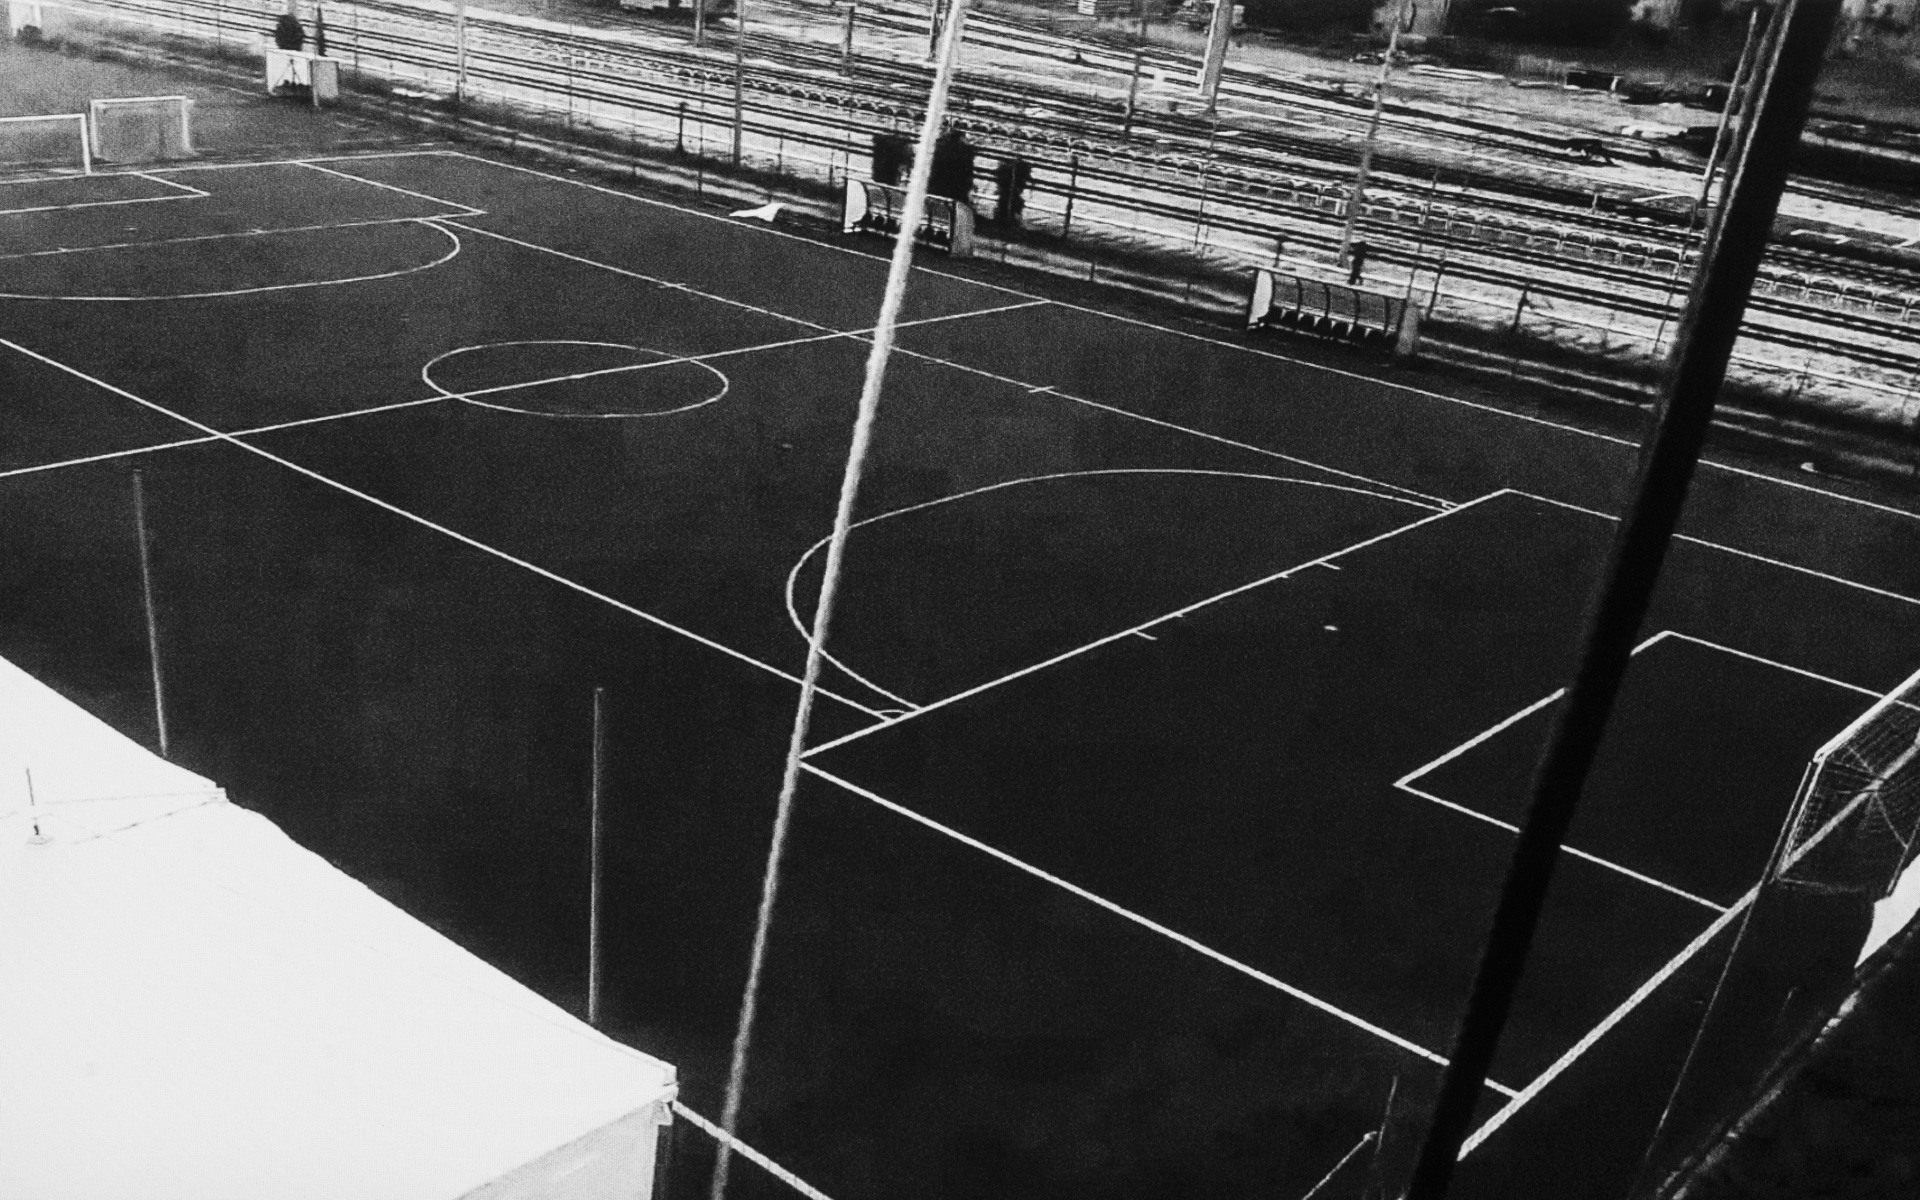 Terni, Sport Center Soccer Angel Di Enrico Frossoni - View by webcam for a live broadcast of soccer matches that are played every day at 5 and 7 pm. Terni, Italy. March 25. 2020.